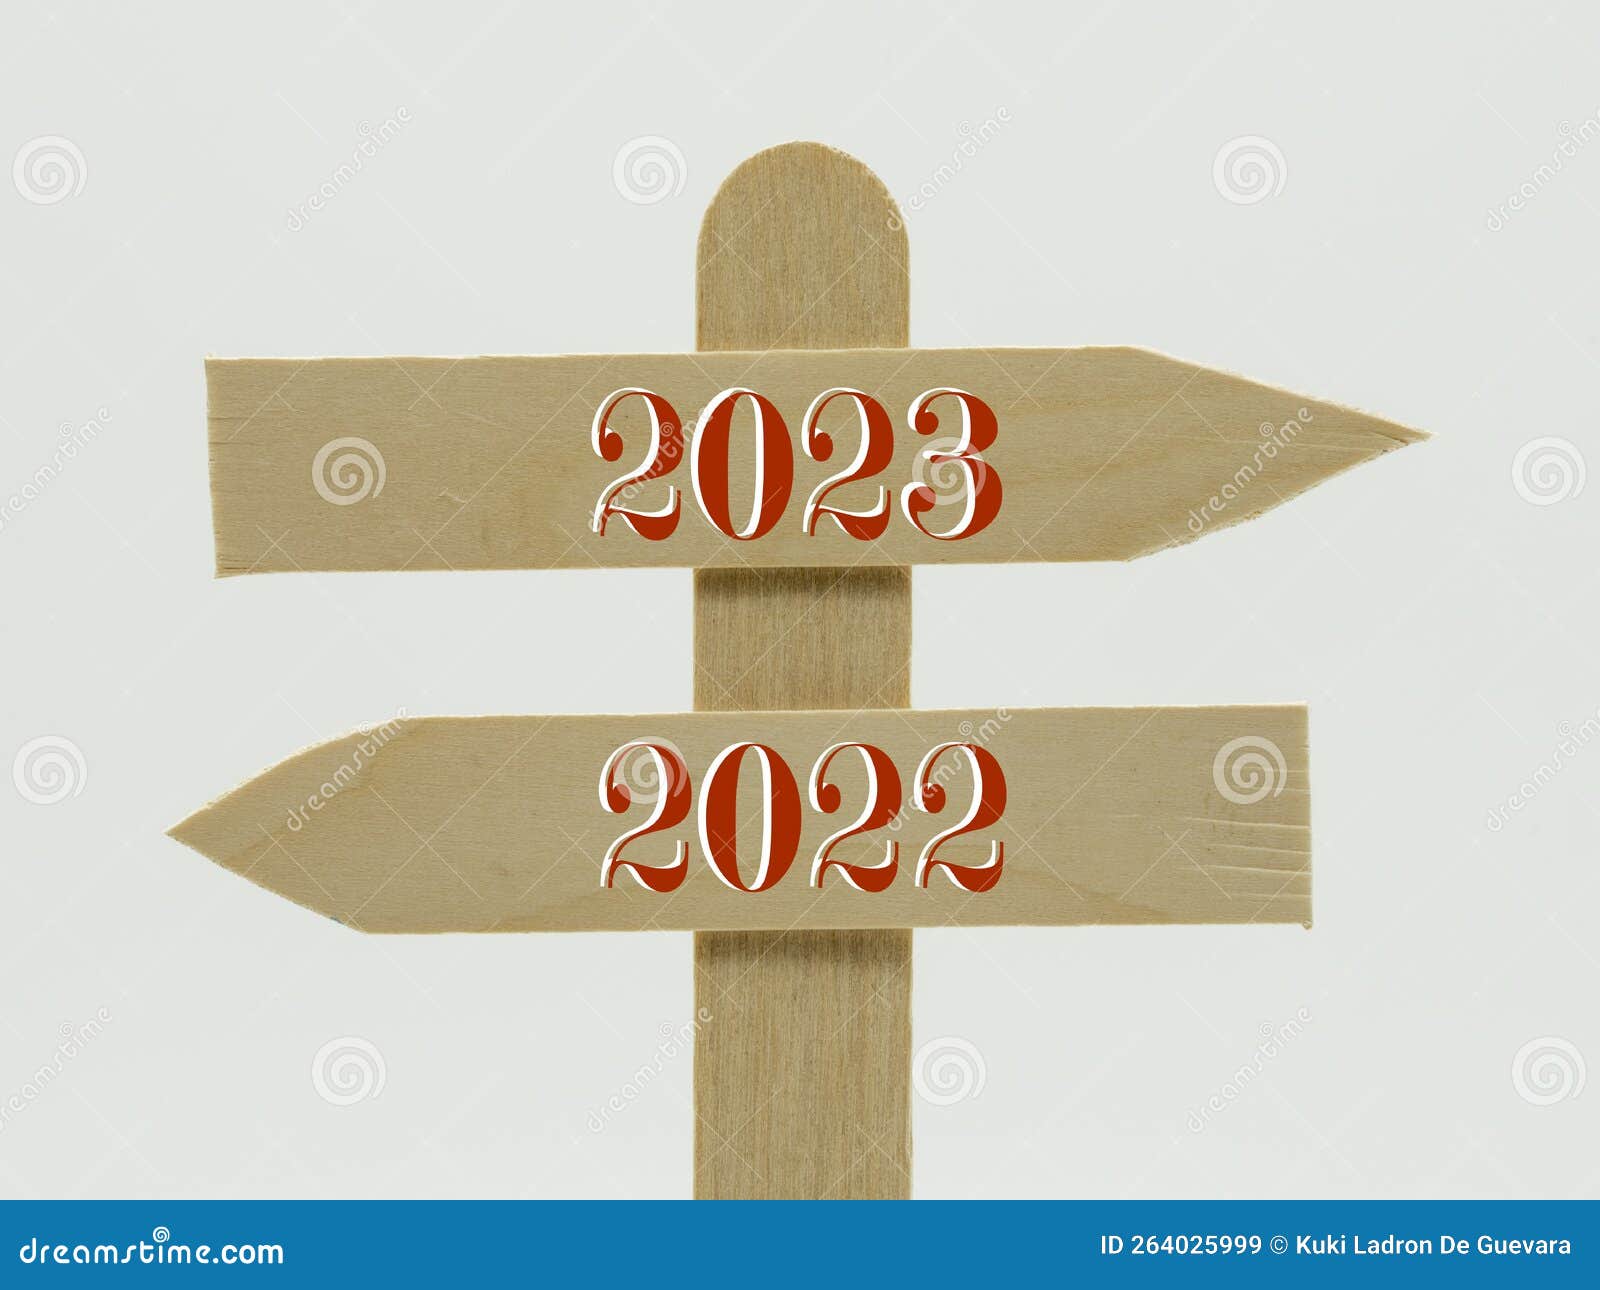 wooden indicator sign with the year 2023 and 2022